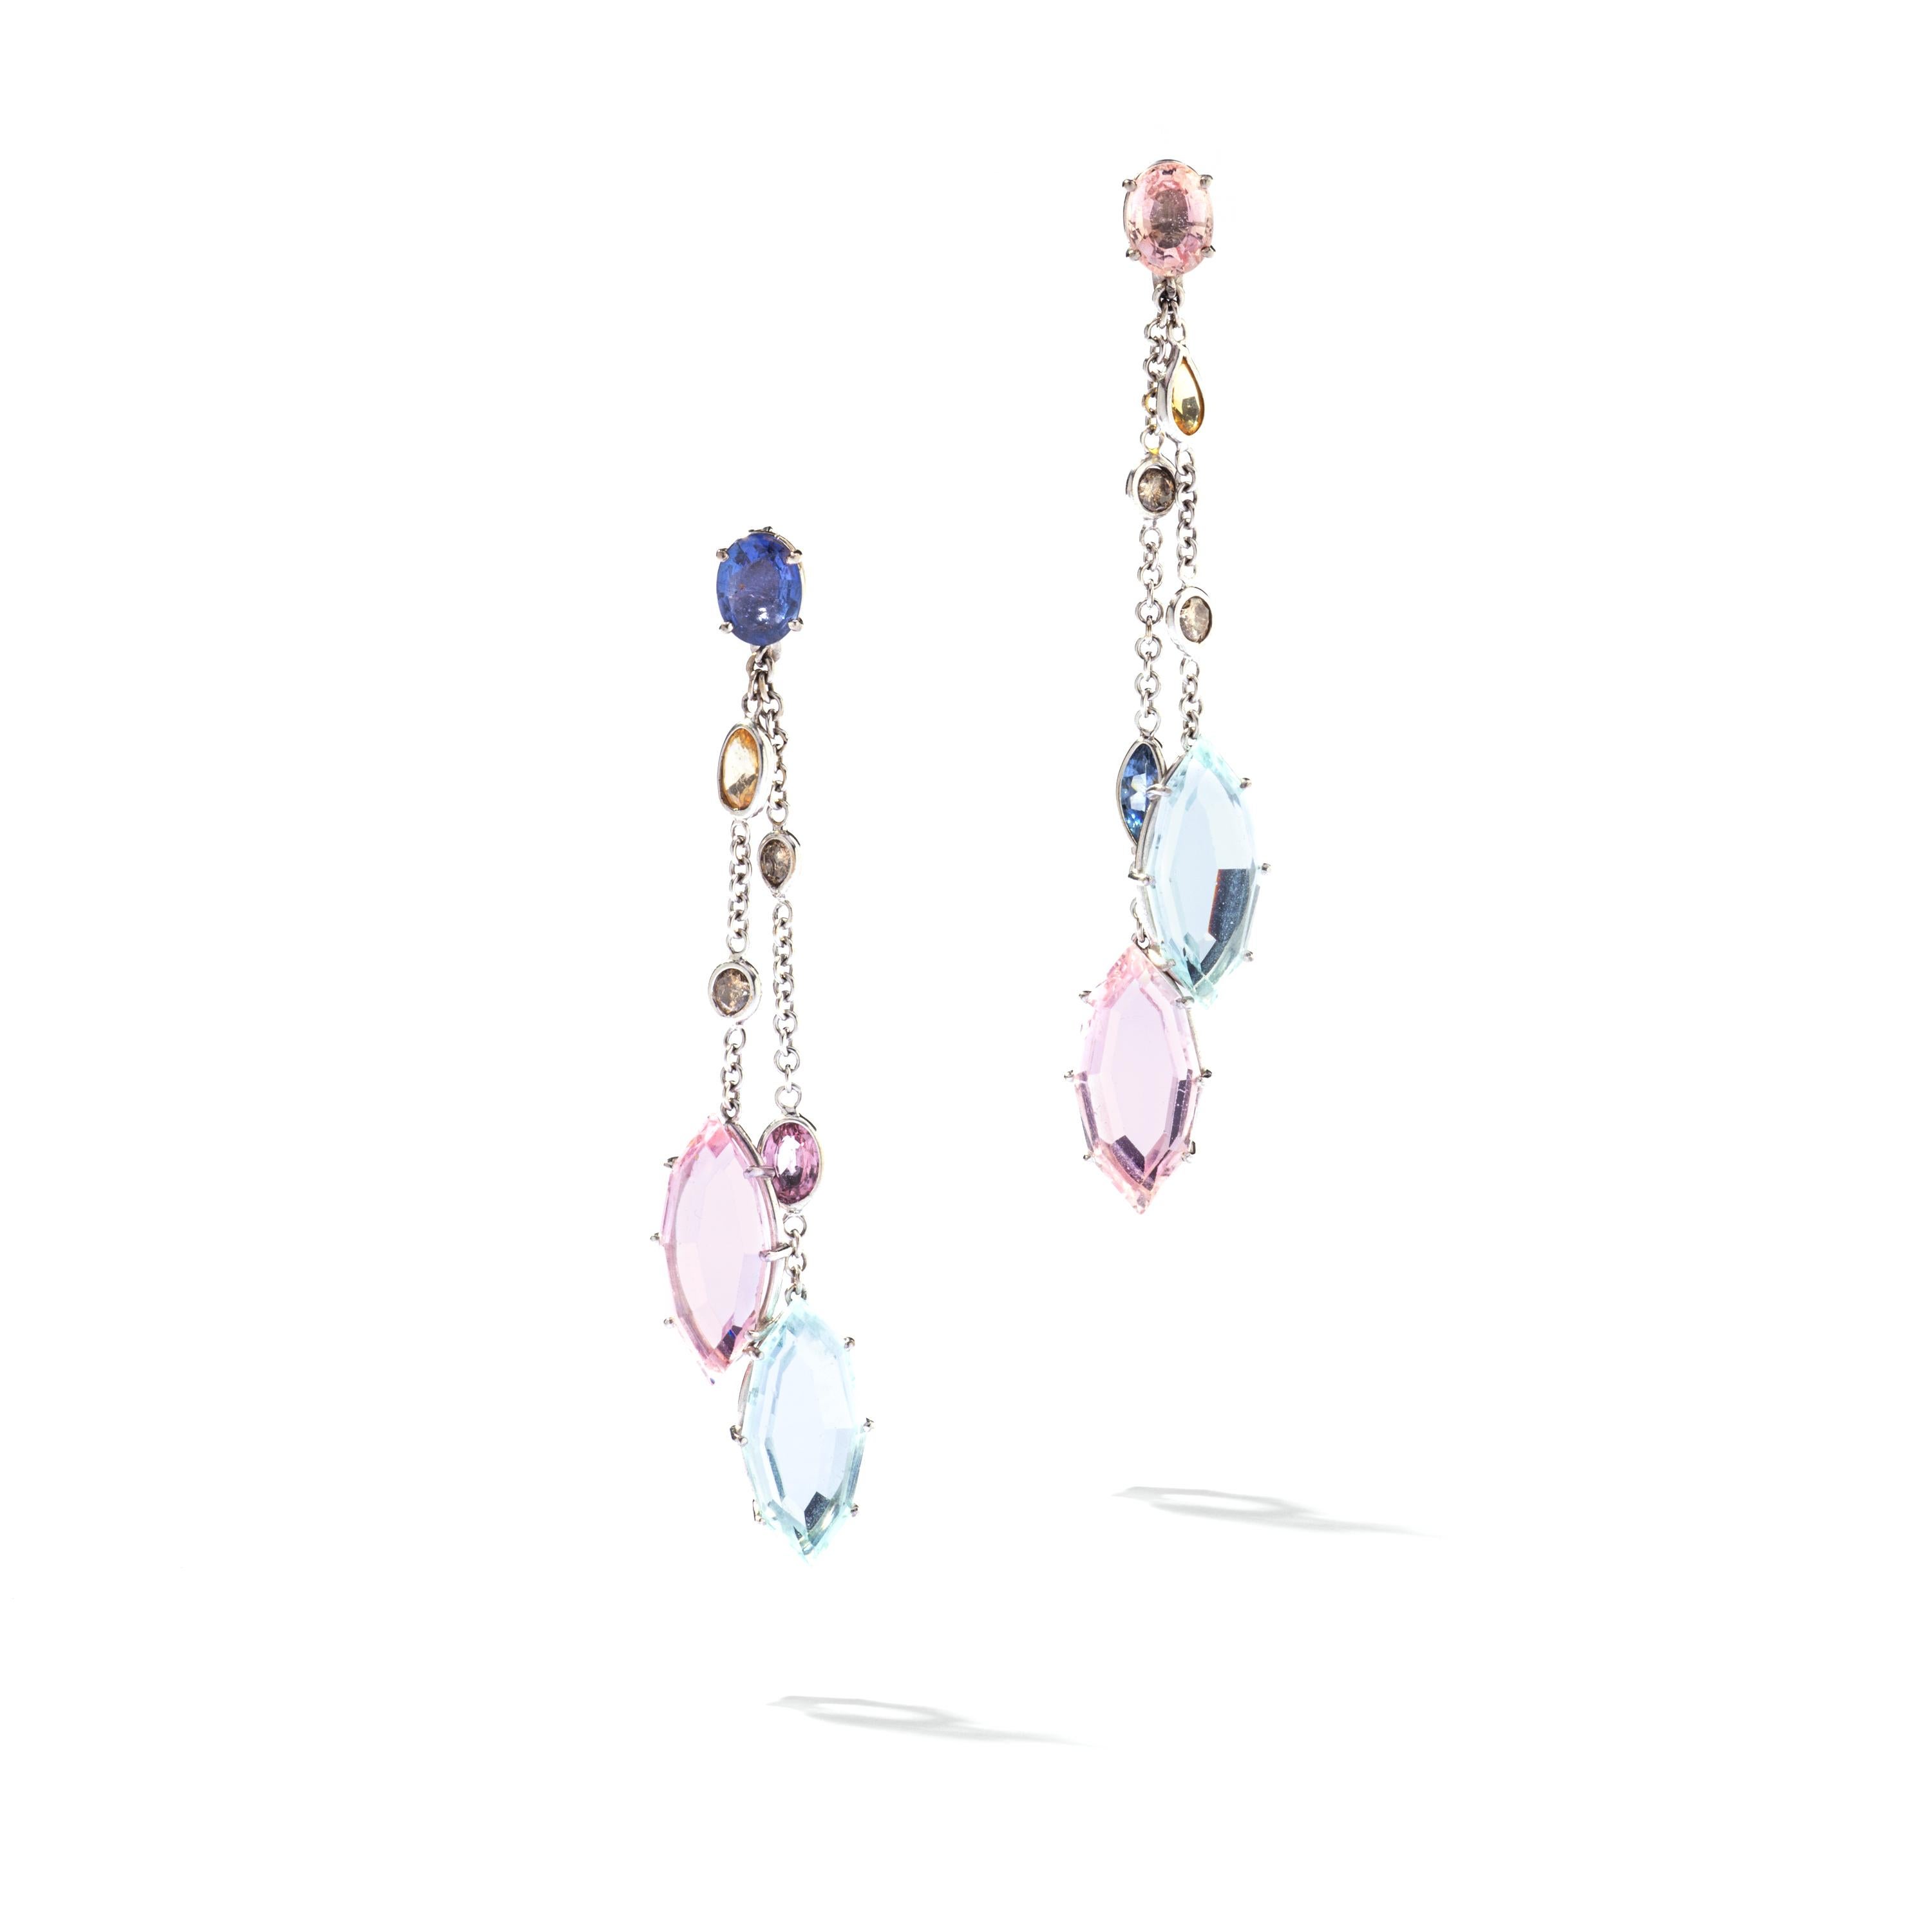 Aquamarine, Kunzite, Sapphire and brown Diamond on White Gold Ear Pendants.

Total length: 2.76 inches (7.00 centimeters).
Total weight: 10.62 grams.